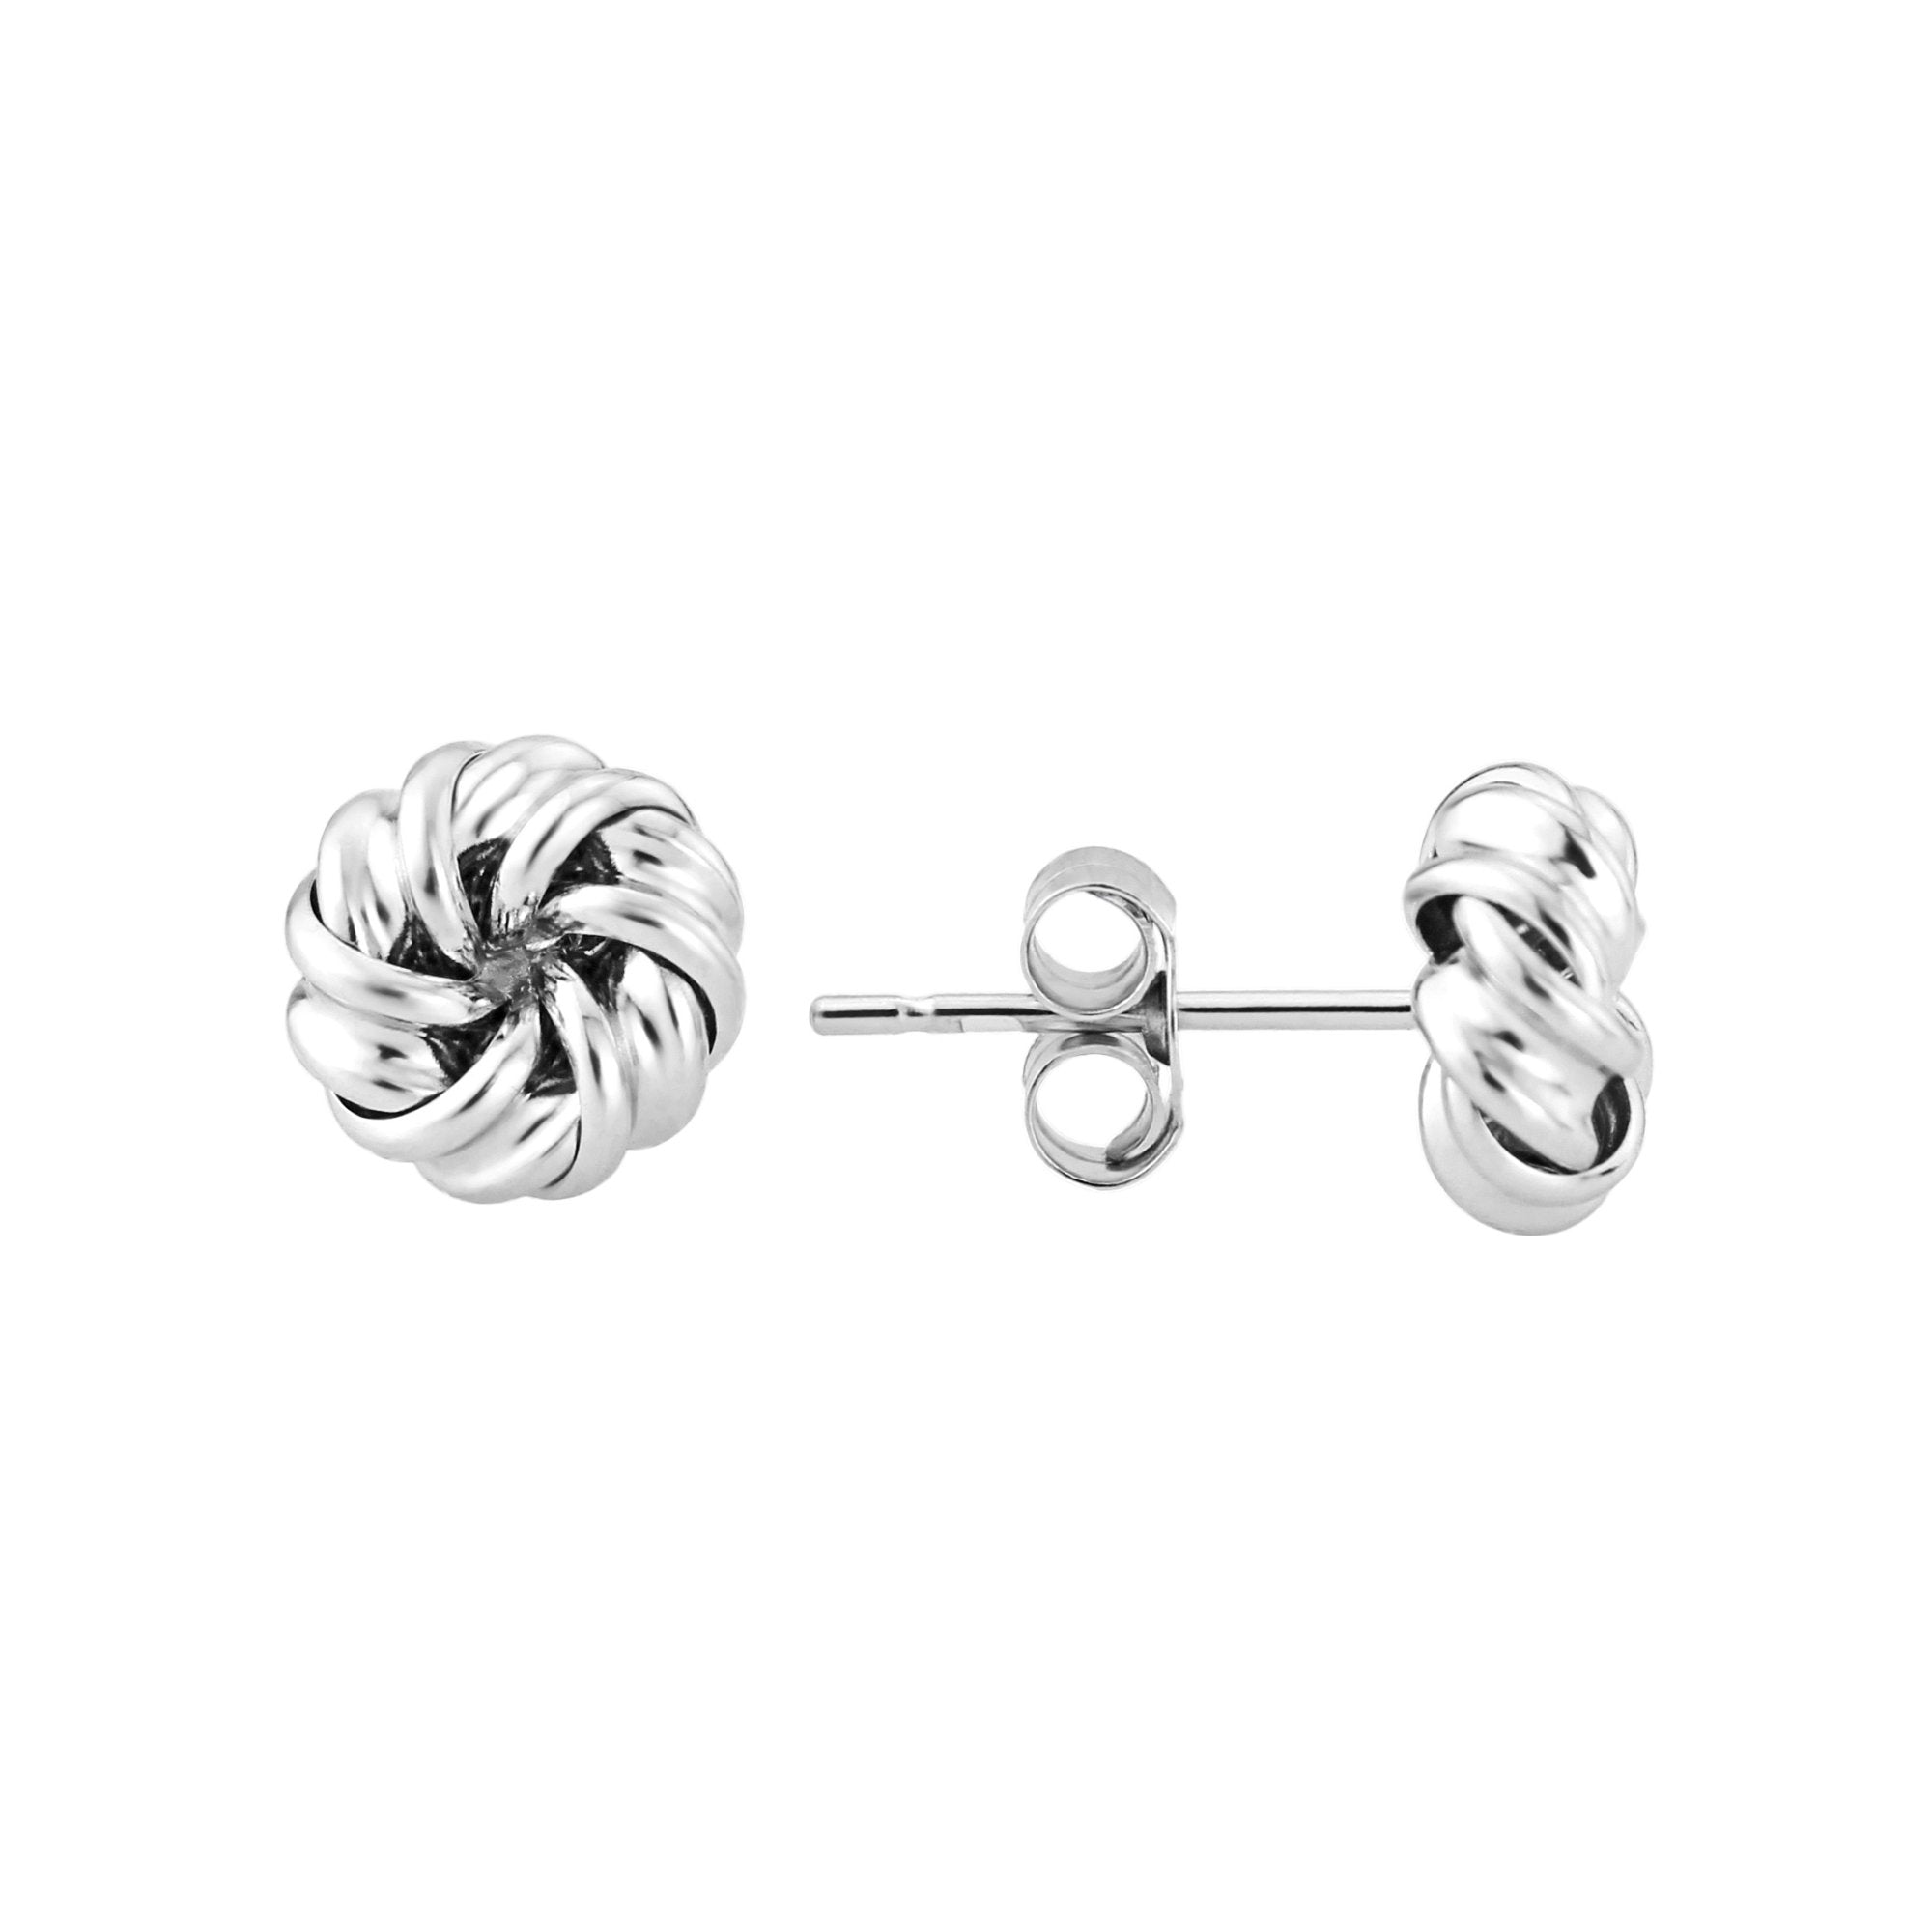 9ct white gold knot stud earrings